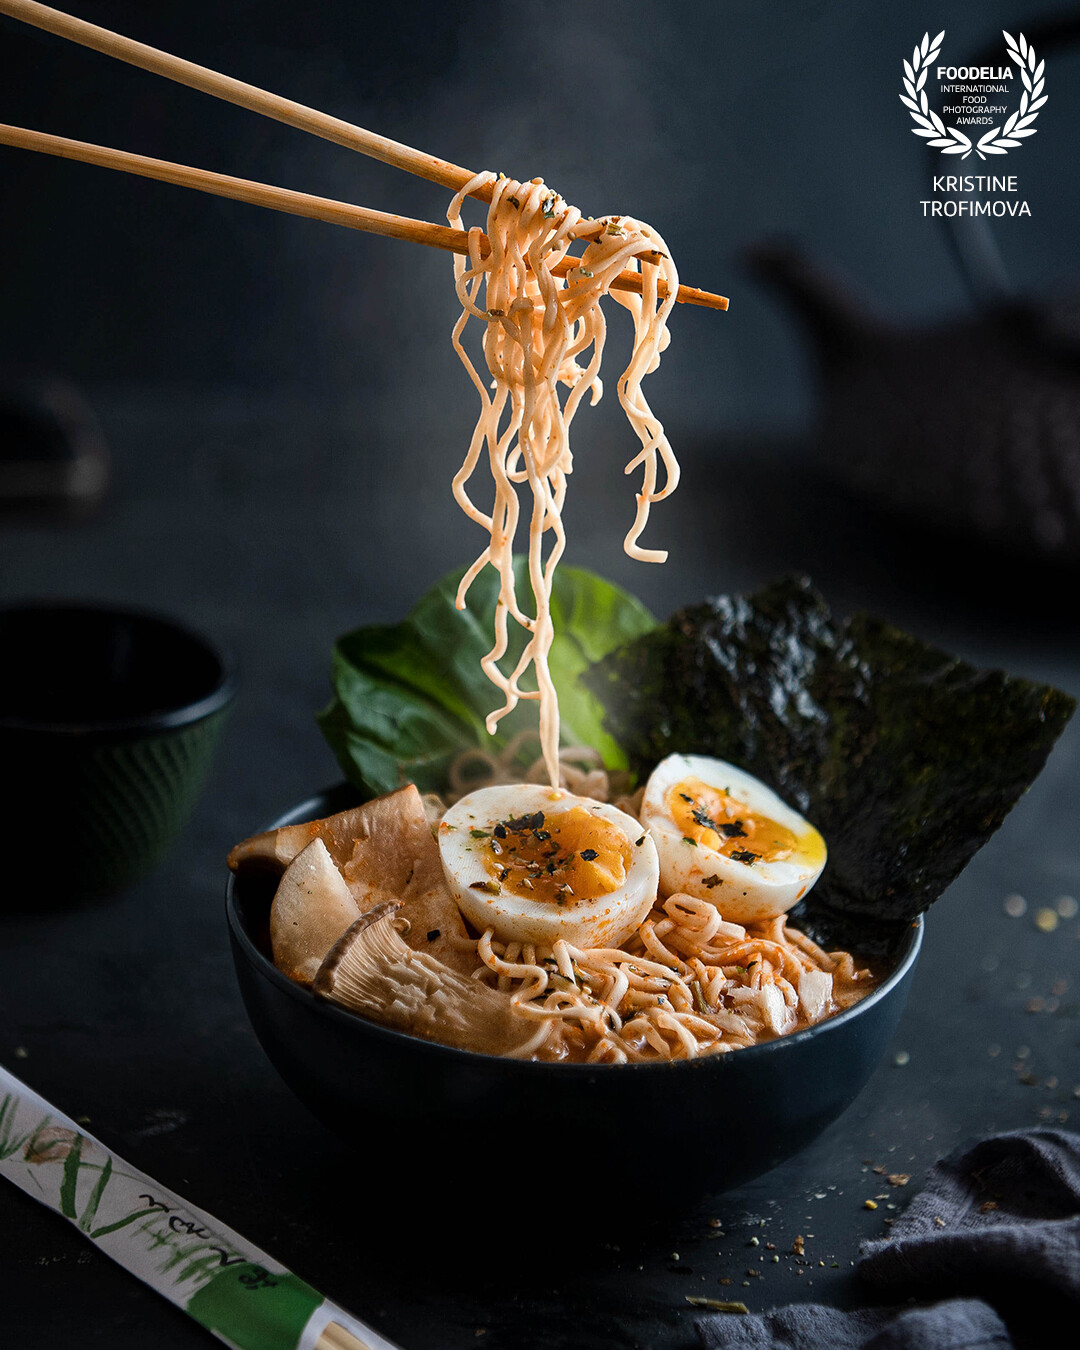 A Noodle's Tale: My Culinary Awakening in Food Photography.<br />
<br />
This image is incredibly special to me—it's the first food photo I took before realizing I was destined to be a food photographer. It marked the beginning of my journey in food photography.<br />
<br />
-SPICY,CREAMY RAMEN-